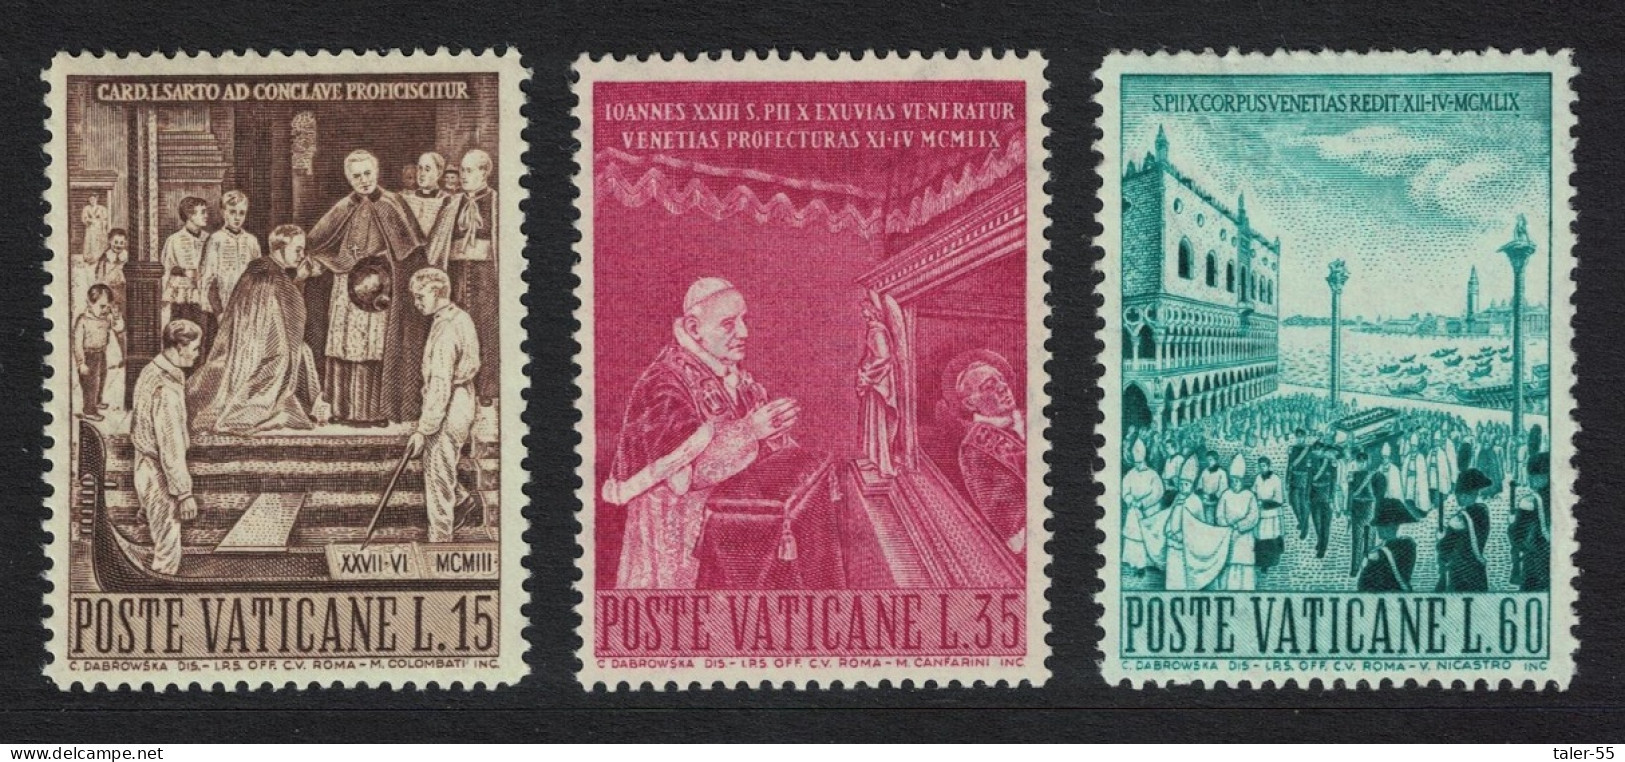 Vatican Transfer Of Relics Of Pope Pius X From Rome To Venice 3v 1960 MNH SG#323-325 Sc#281-283 - Unused Stamps